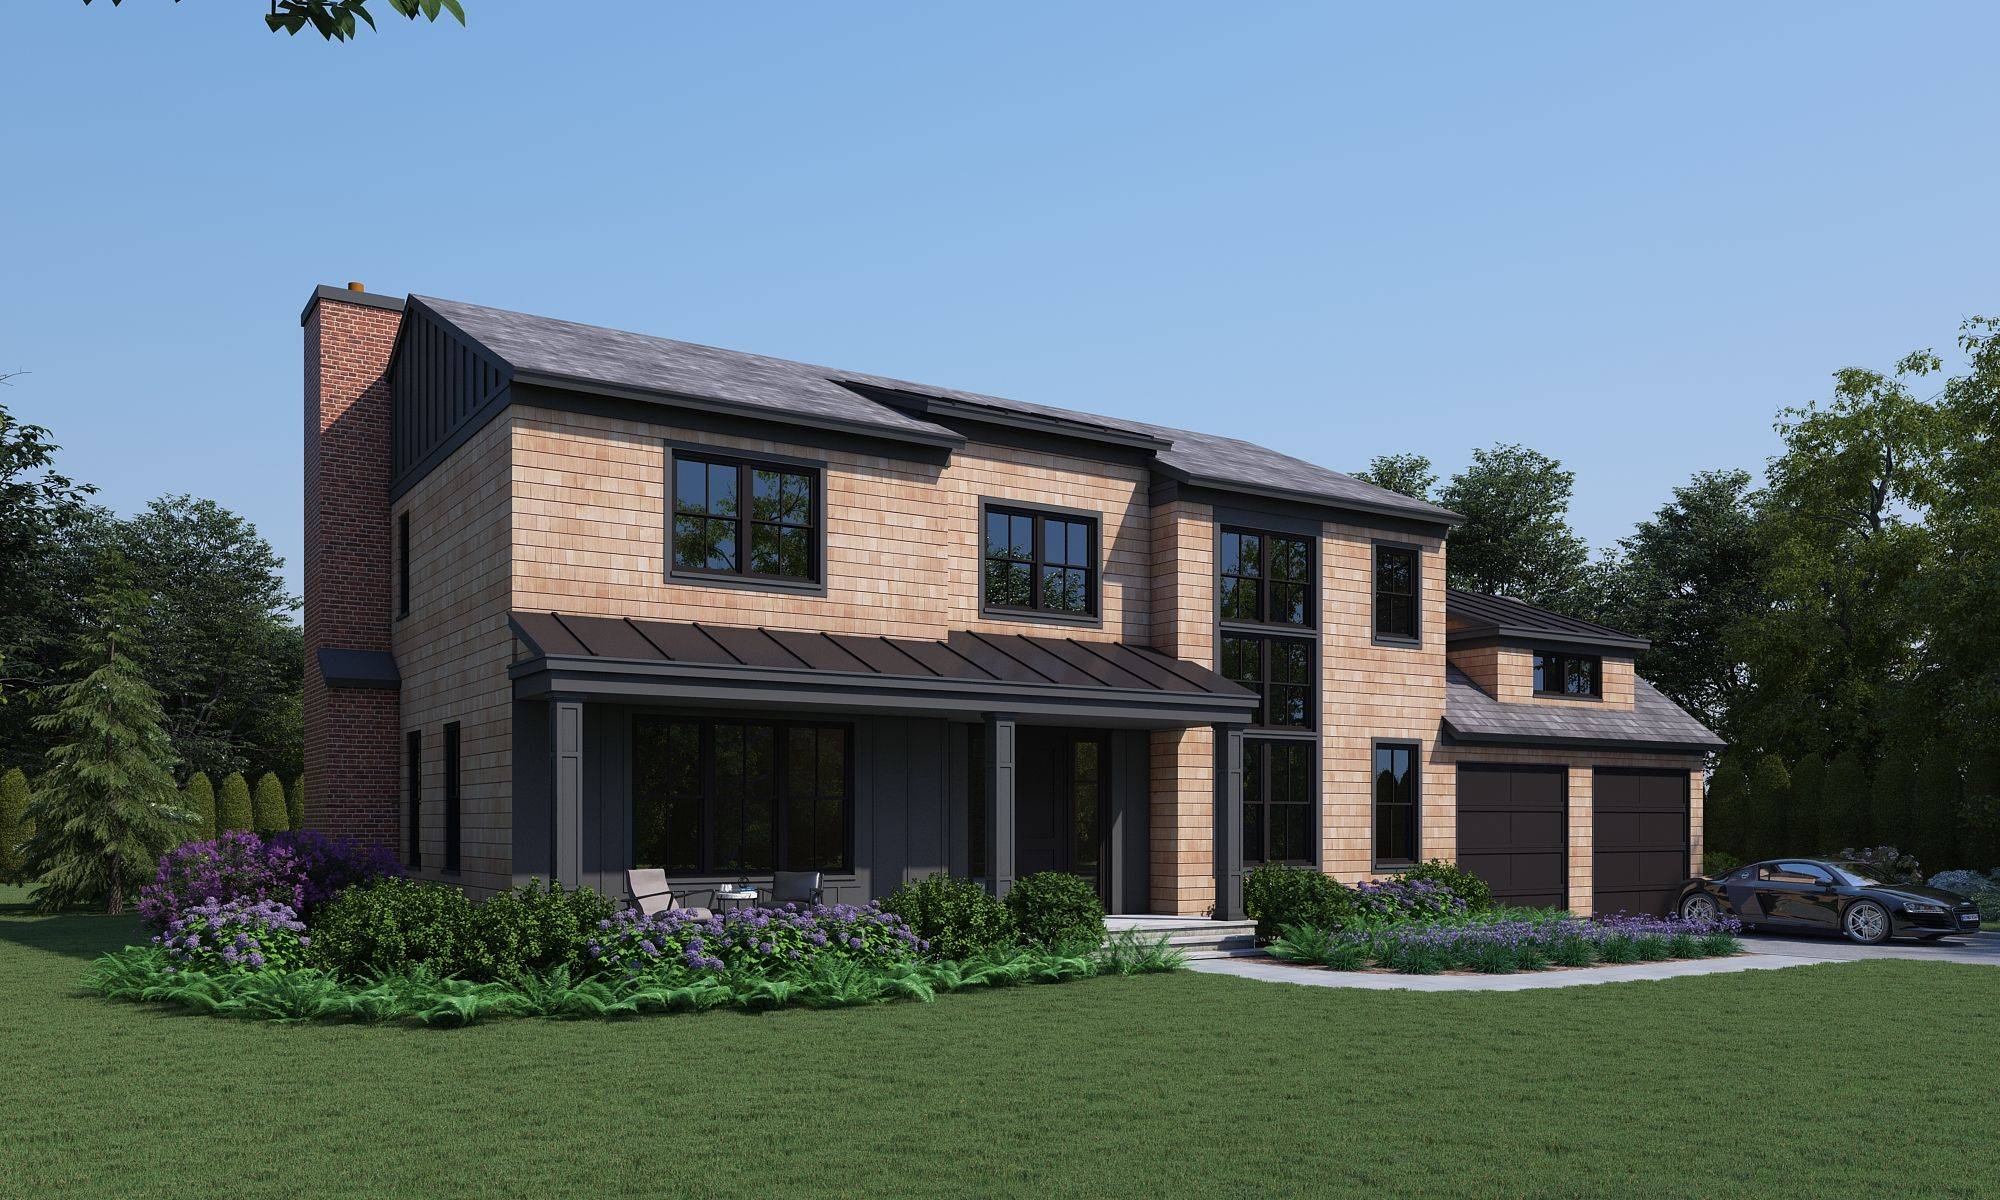 New Construction-Close to the Village of East Hampton